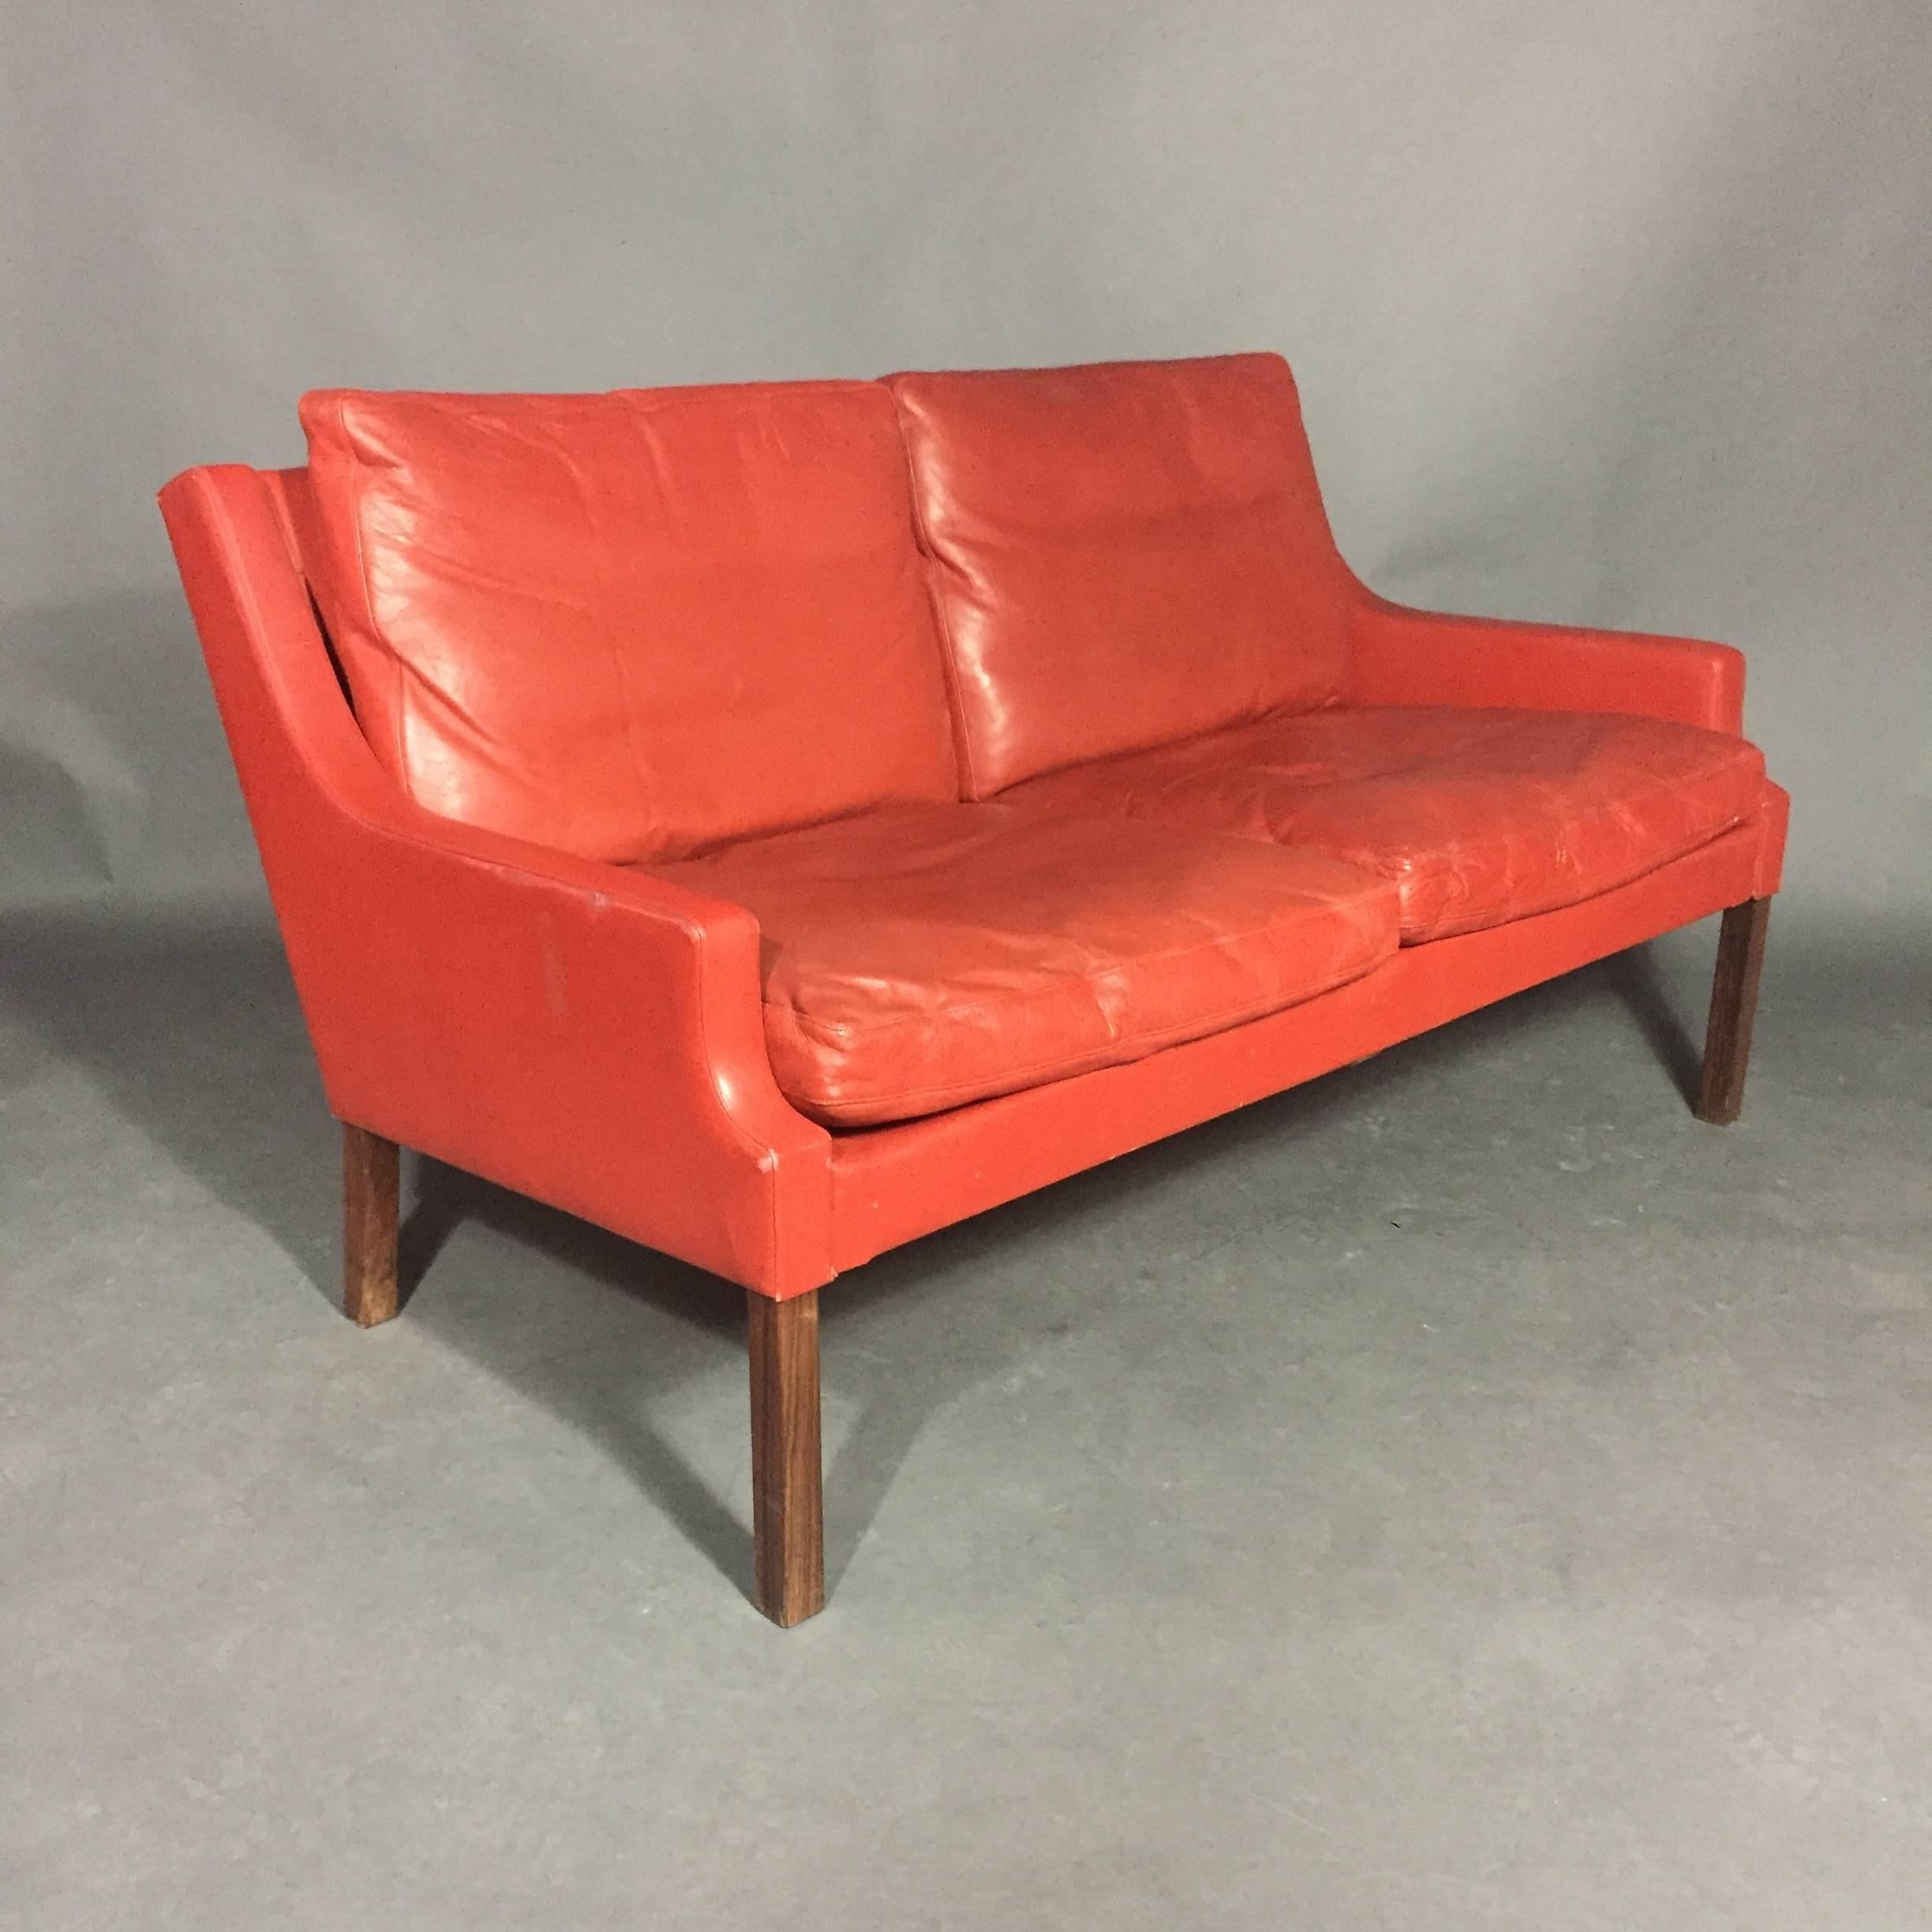 A gorgeous red/orange two-seat leather sofa by Georg Thams with rosewood legs and four loose cushions. Leather is soft and supple, Manufactured by Vejen Polstermøbelfabrik (attached labels), Denmark, 1950s-1960s. Minor scuffs and small break in arm